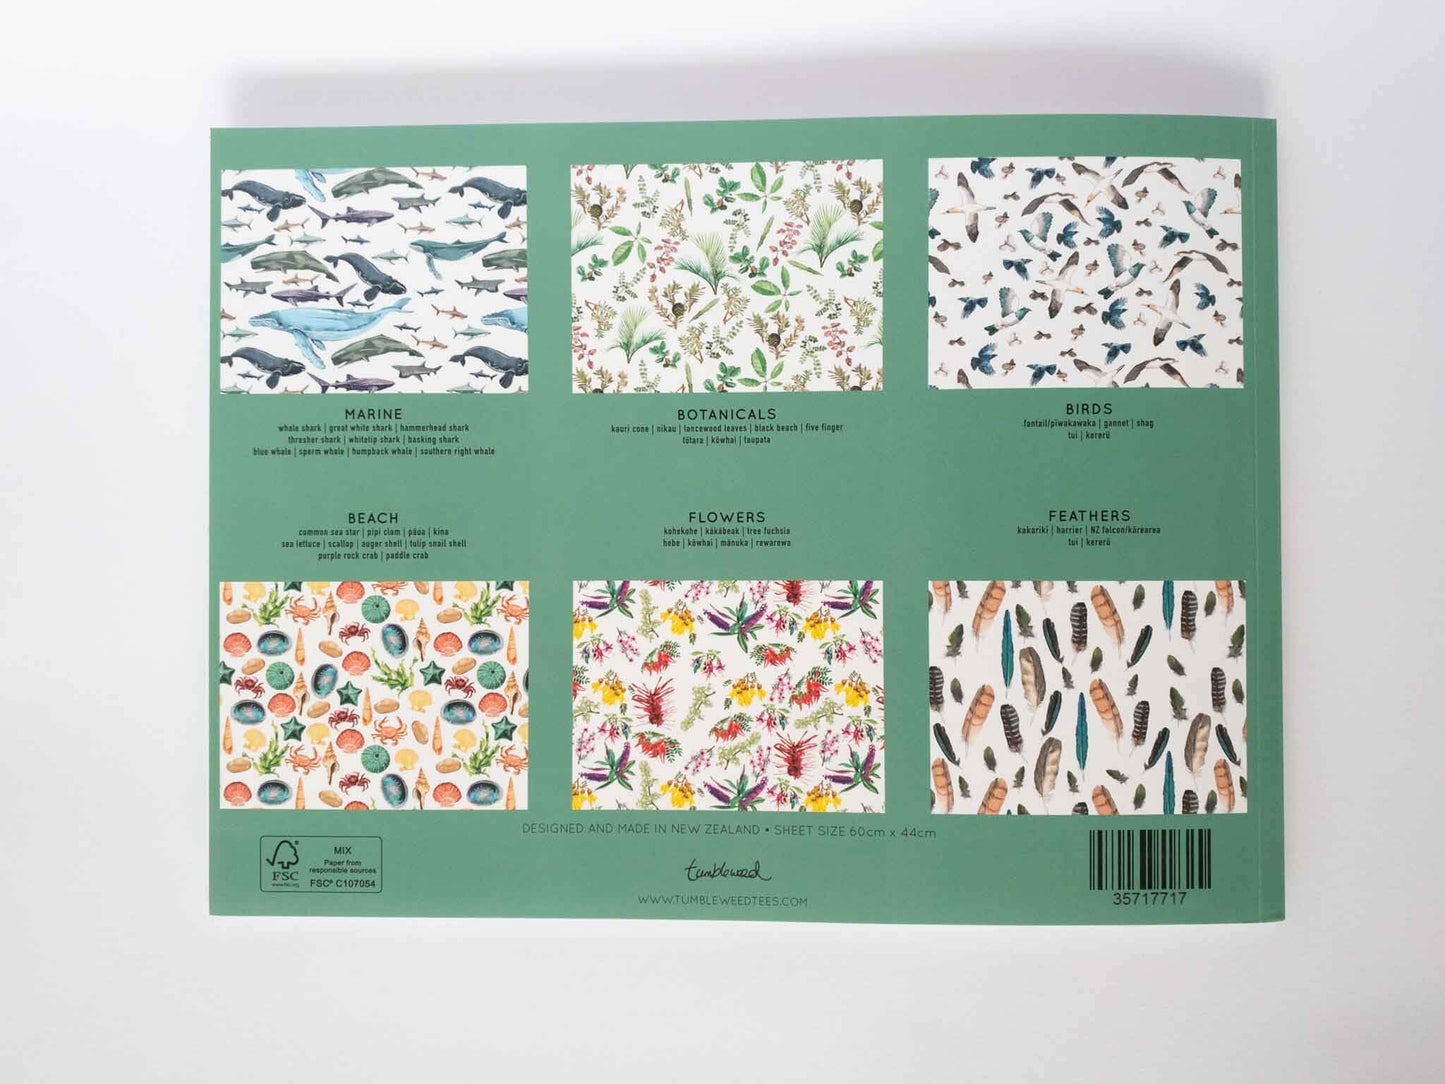 Back cover of wrapping paper book, with thumbnails of the 6 NZ native patterns that feature as wrapping paper sheets within the book.